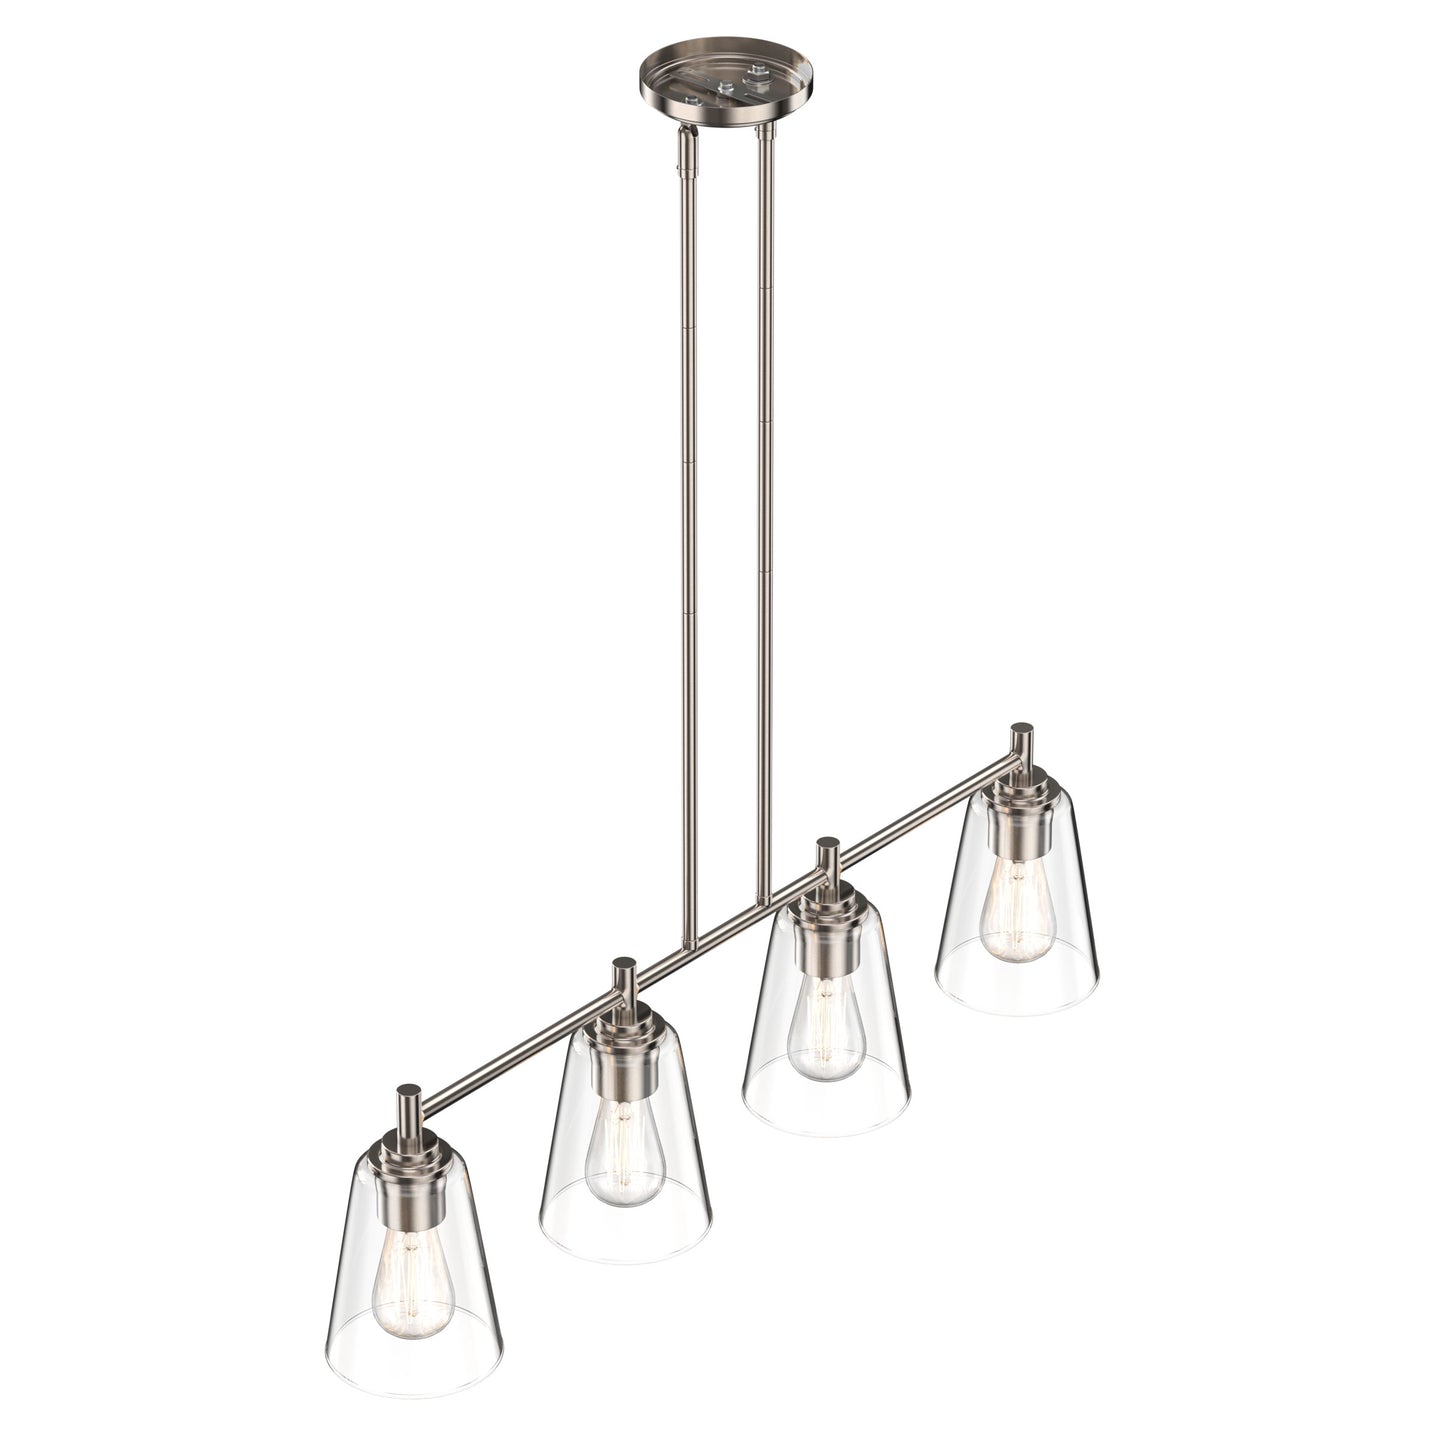 4-Lights Island Linear Pendant Light with Clear Glass Shade, E26 Base, UL Listed for Damp Location